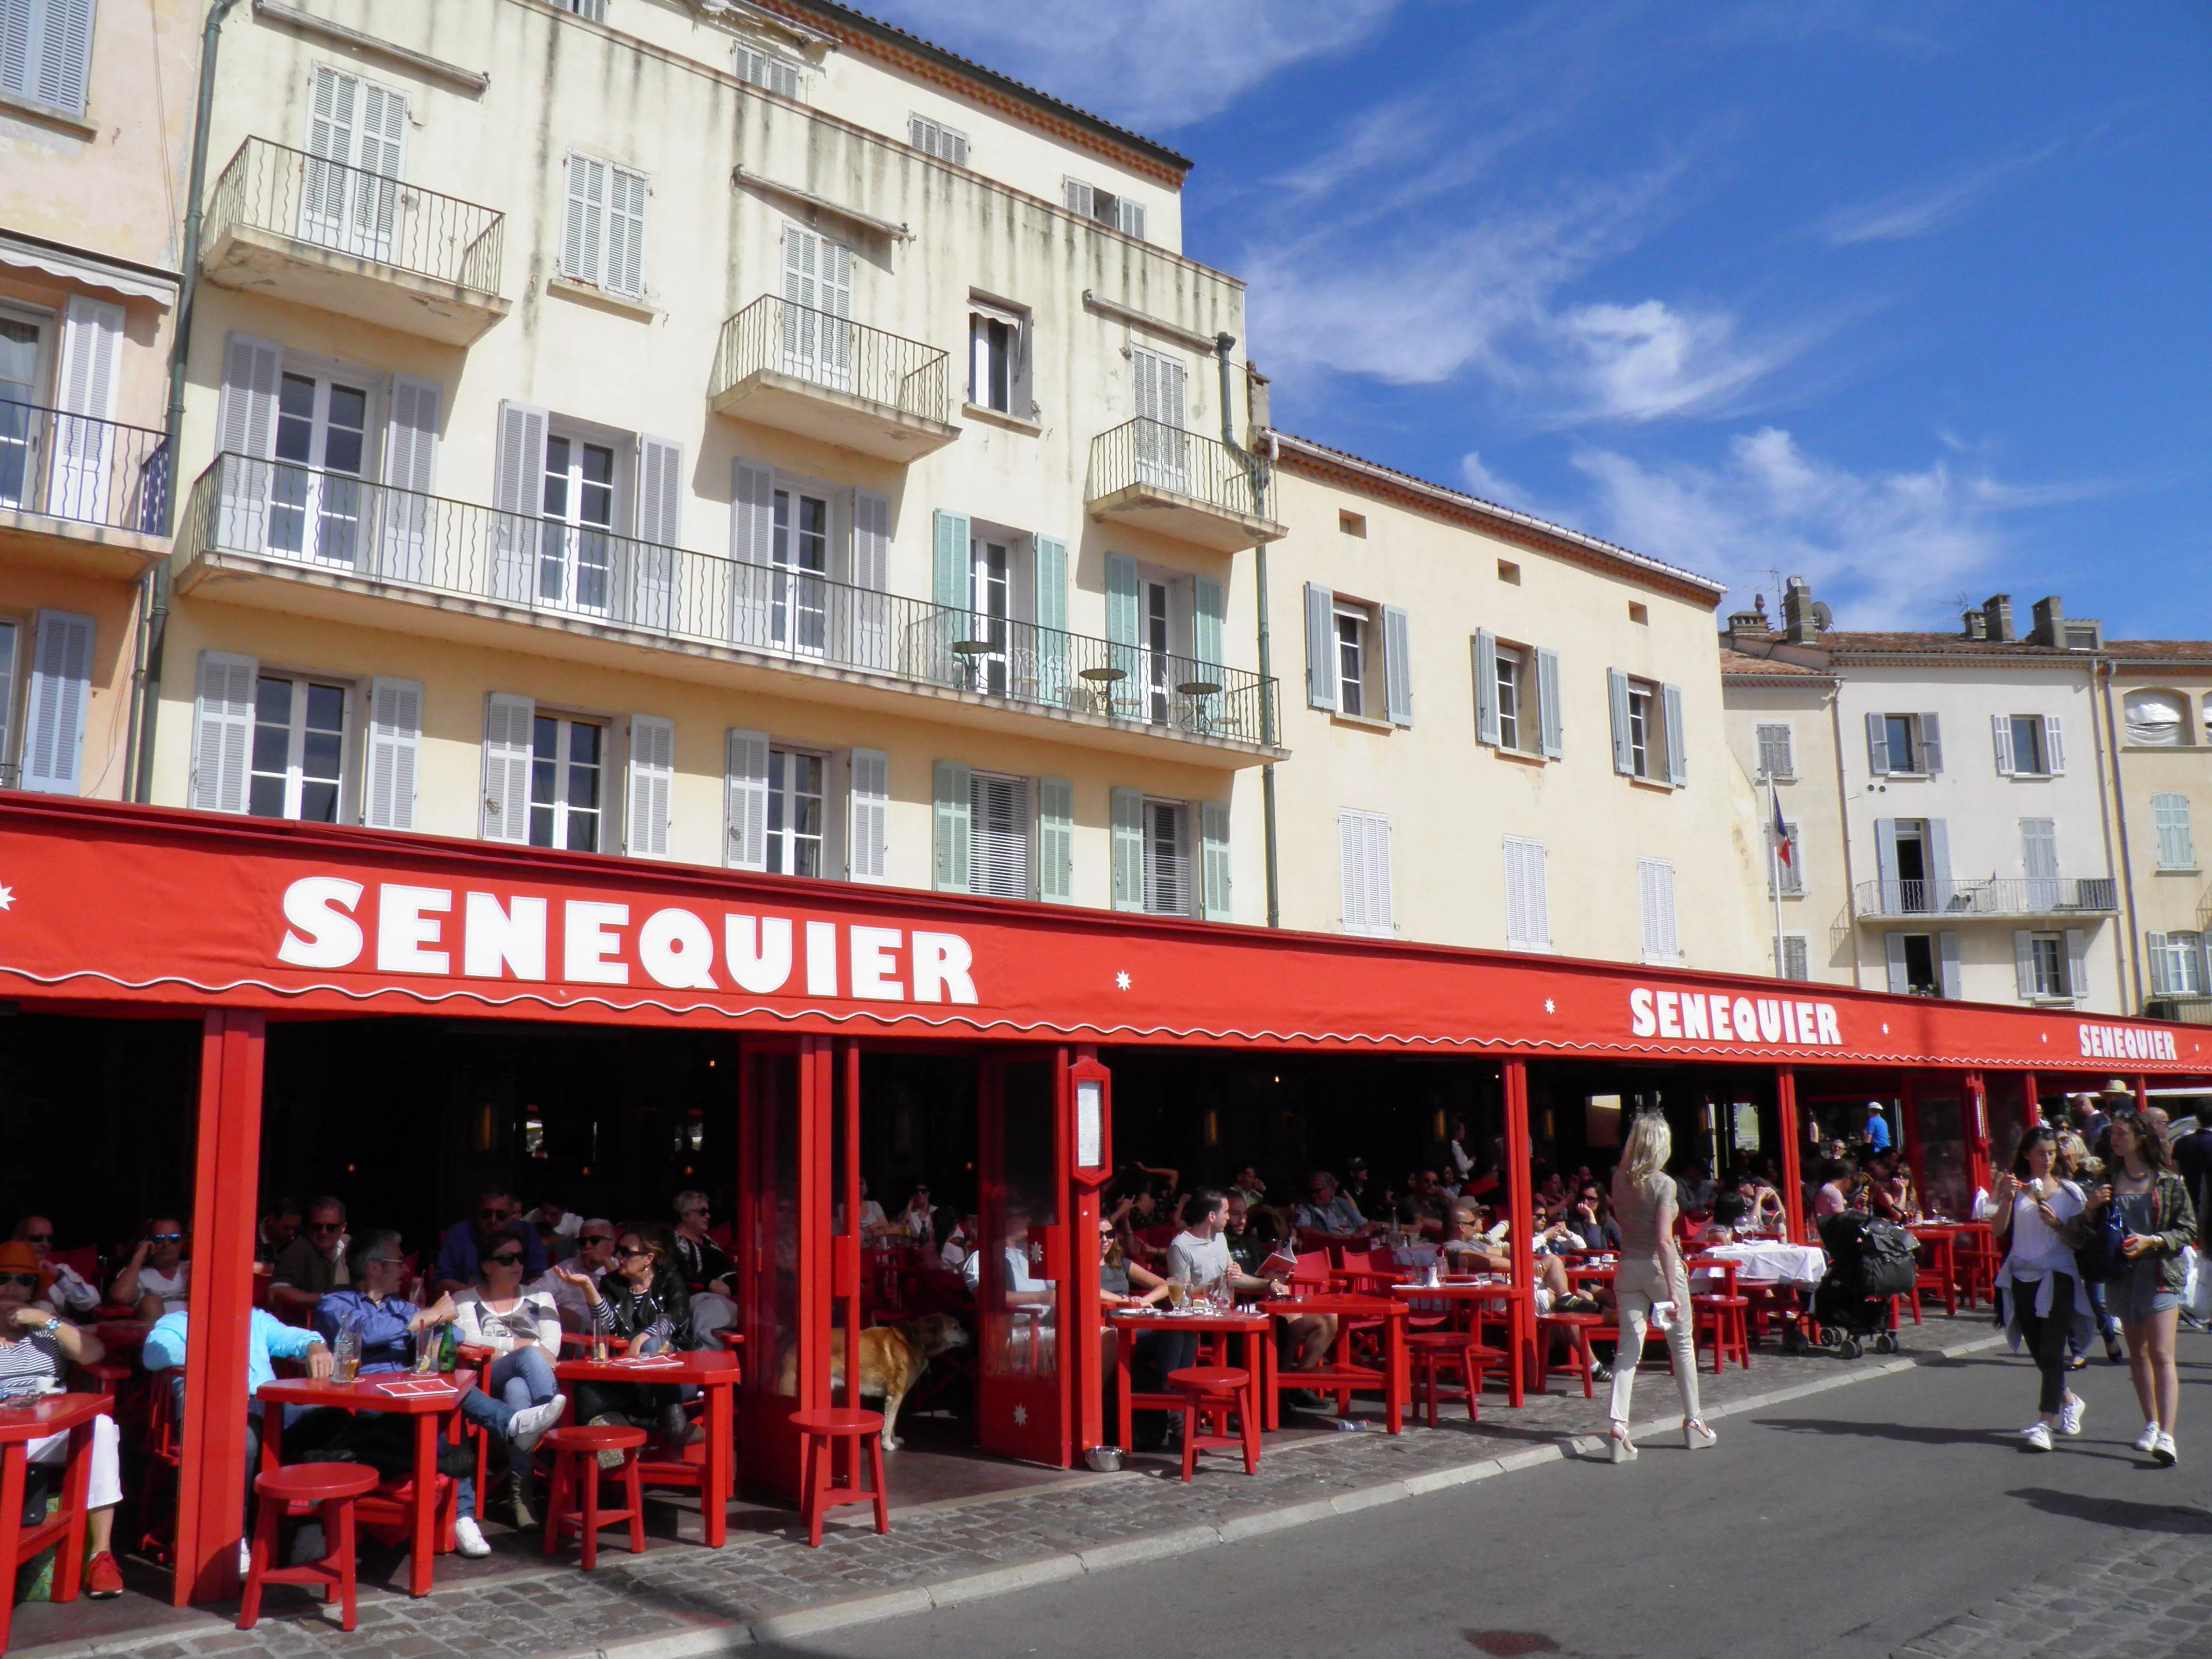 Cafe Senequier in France, Europe | Cafes - Rated 3.1